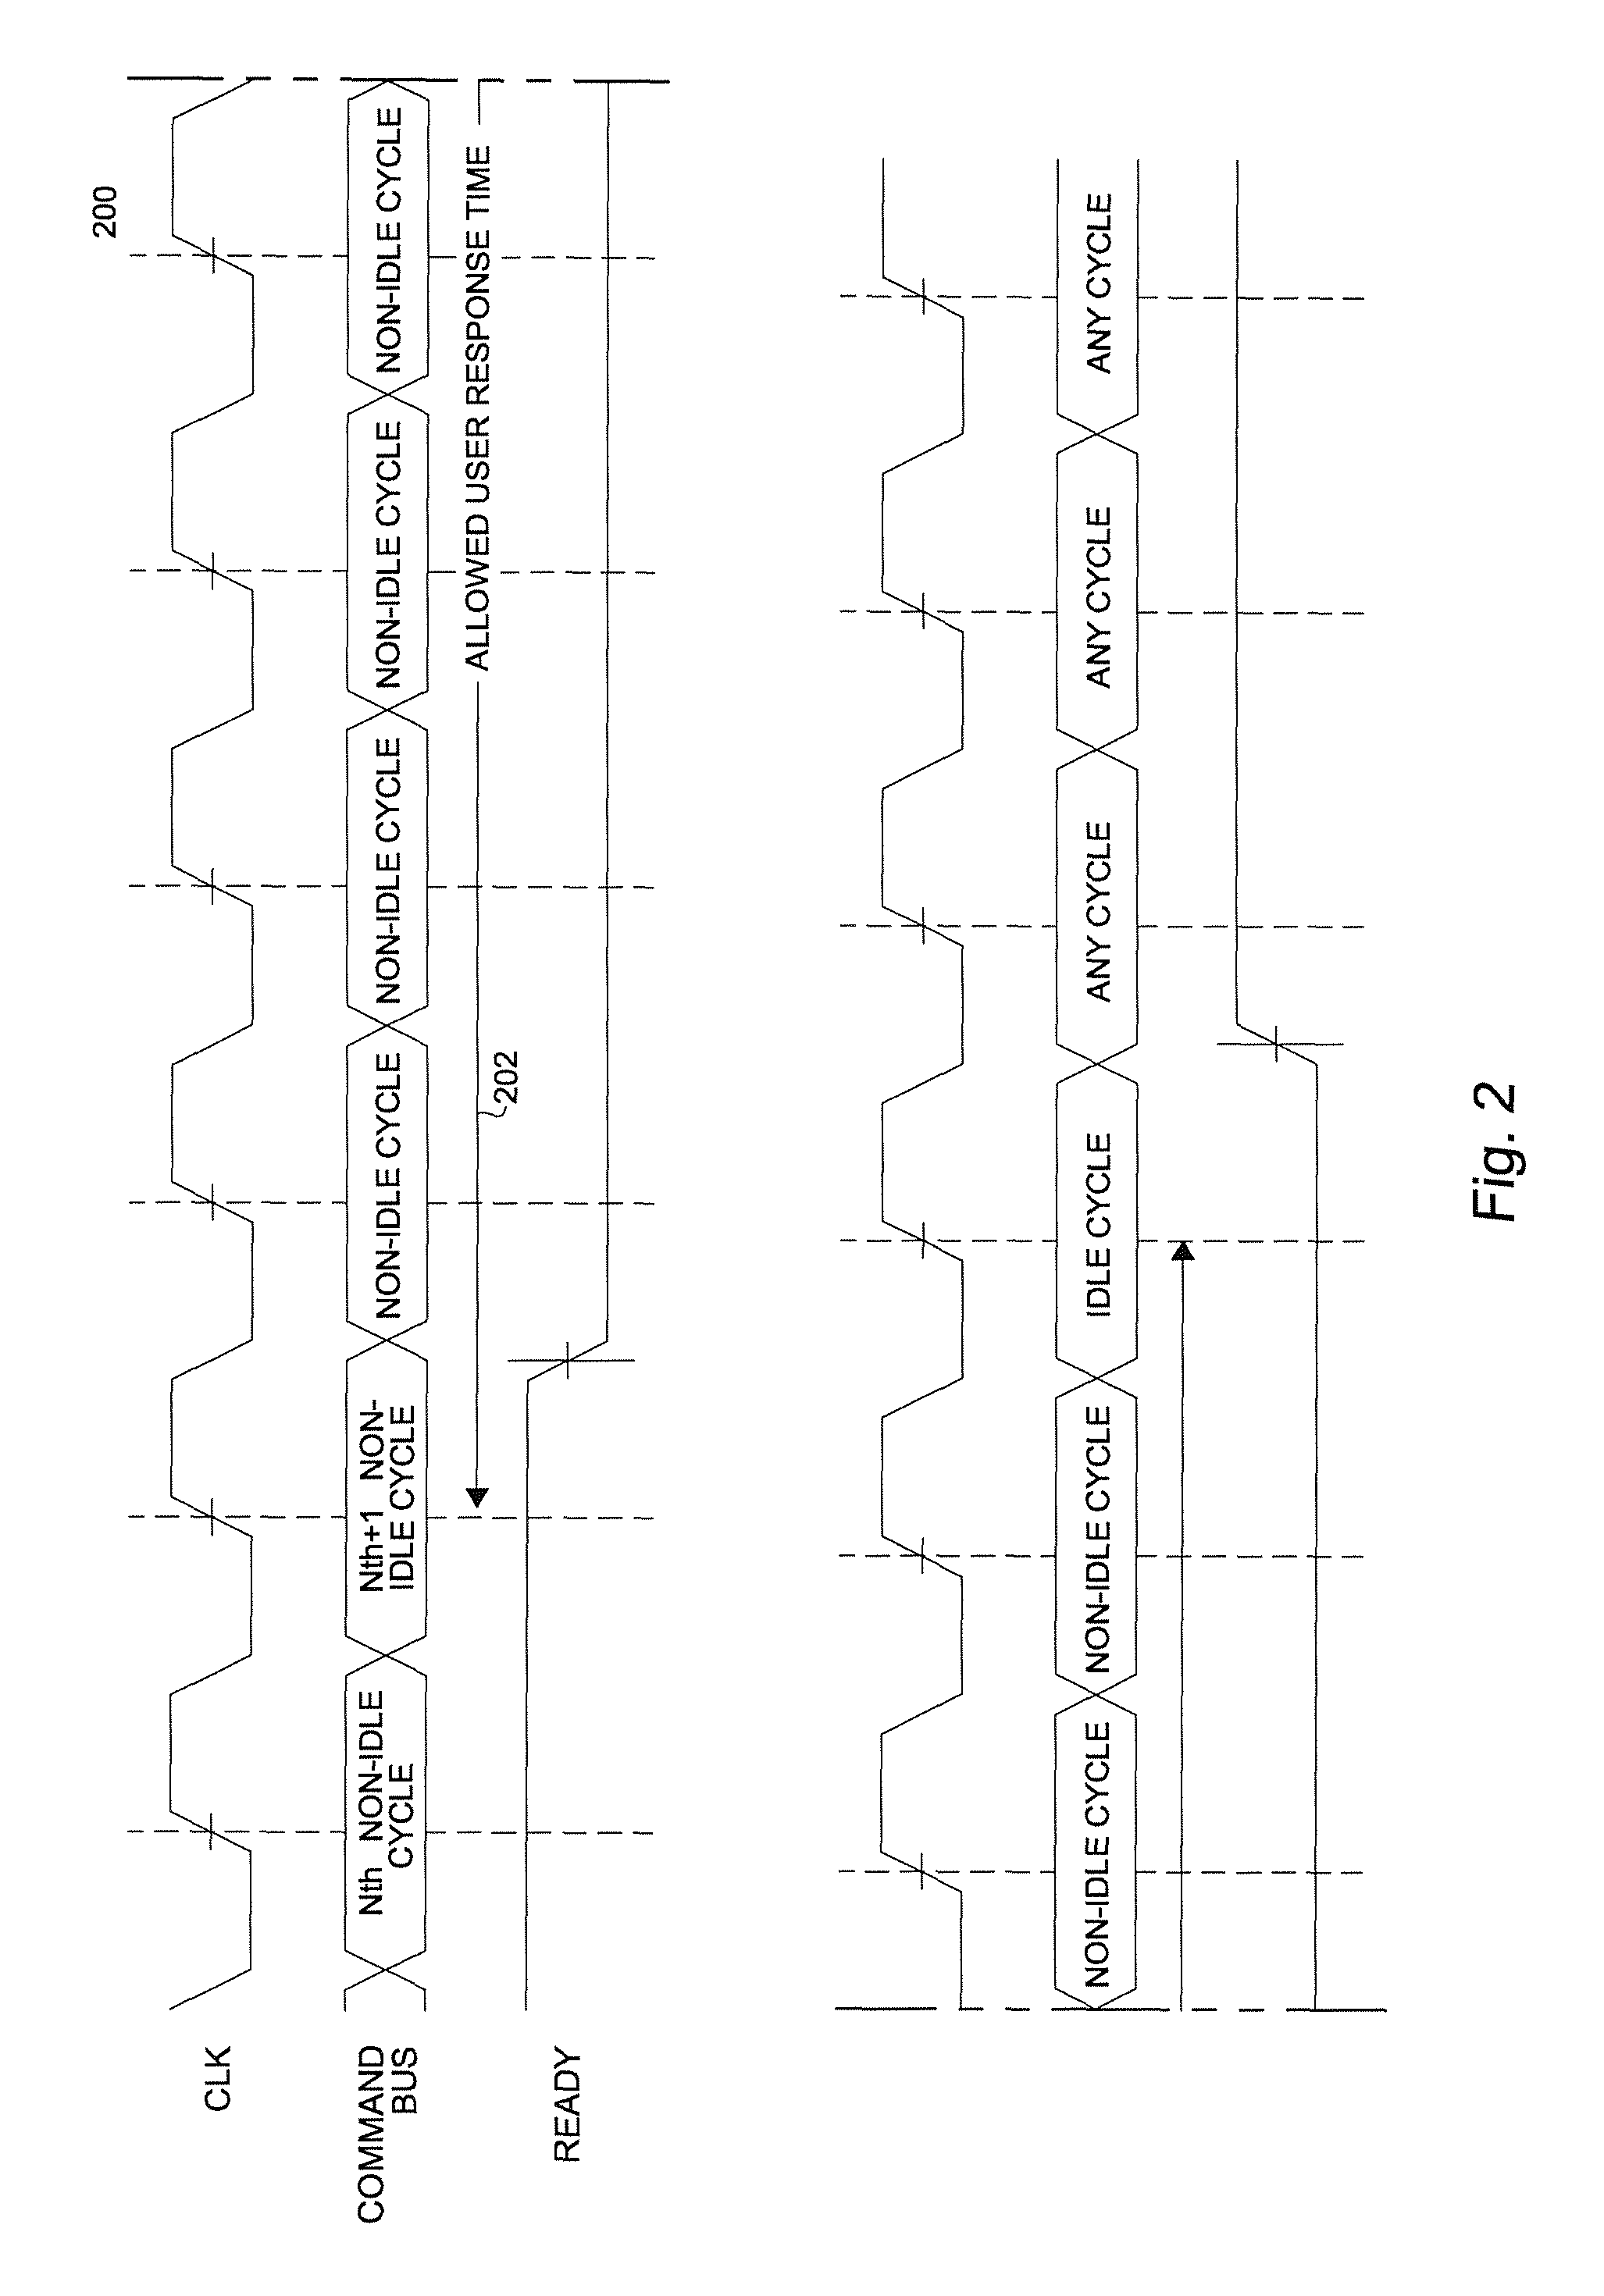 Method for concurrent system management and error detection and correction requests in integrated circuits through location aware avoidance logic